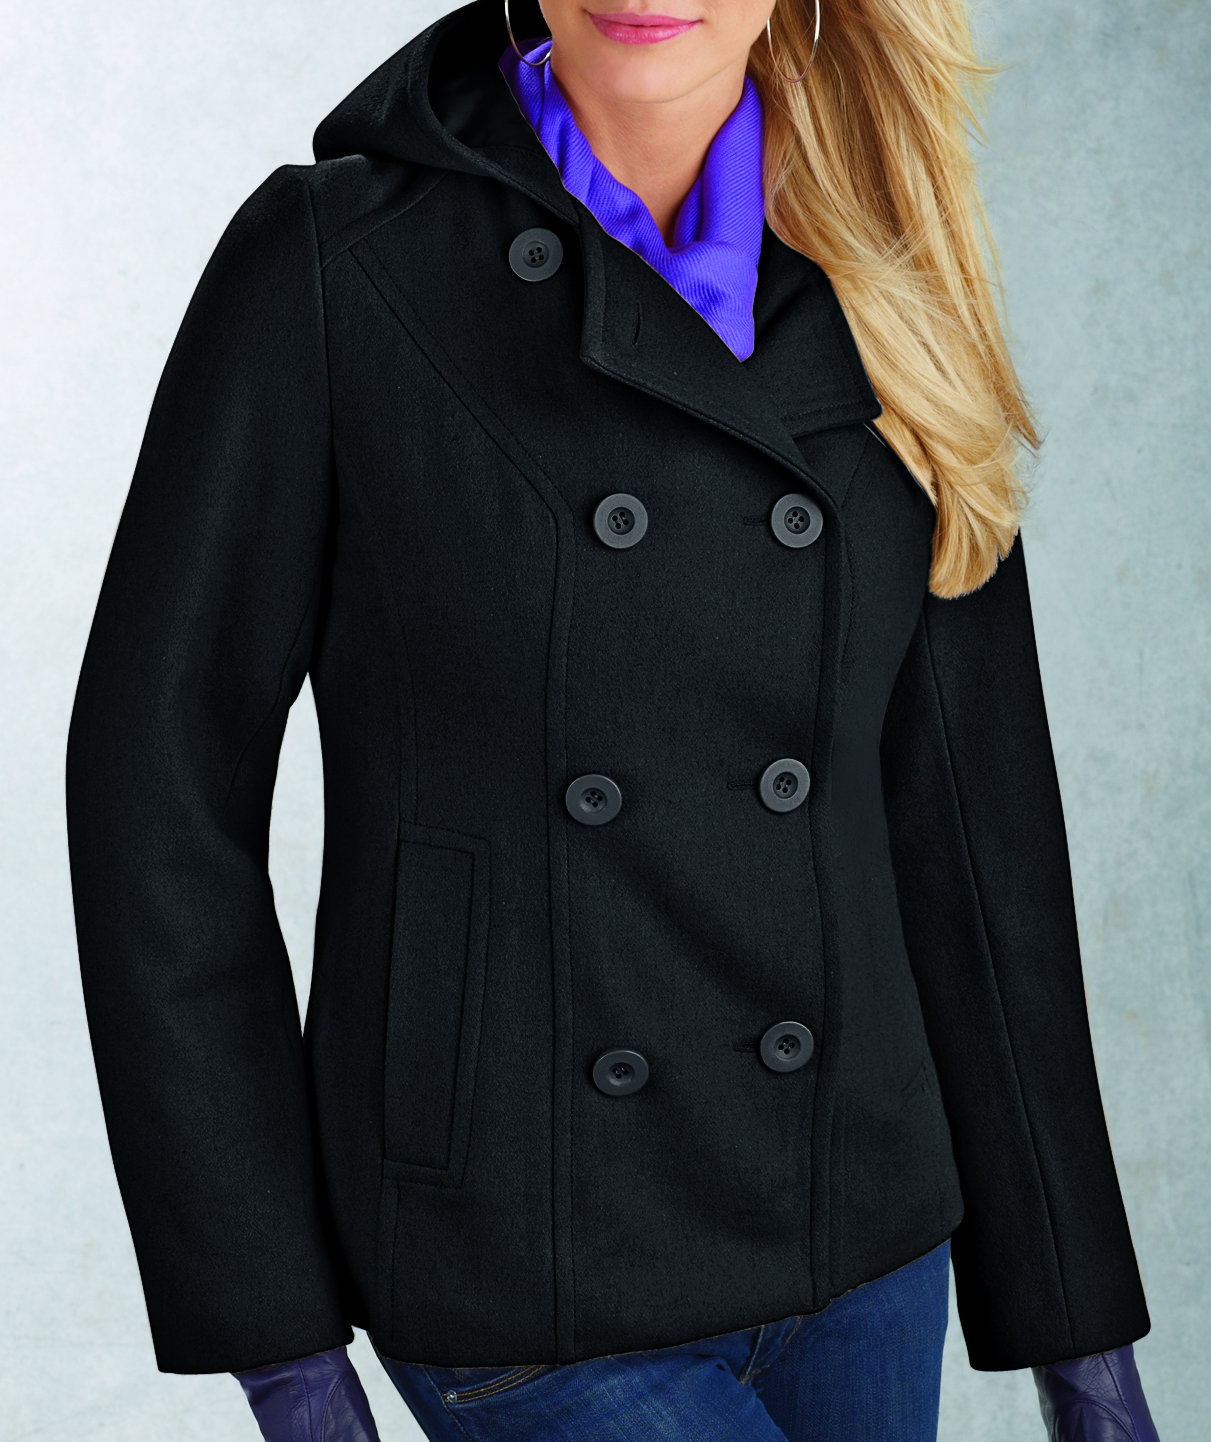 R&O Ladies Double Breasted Peacoat with Attached Hood - Online Exclusive